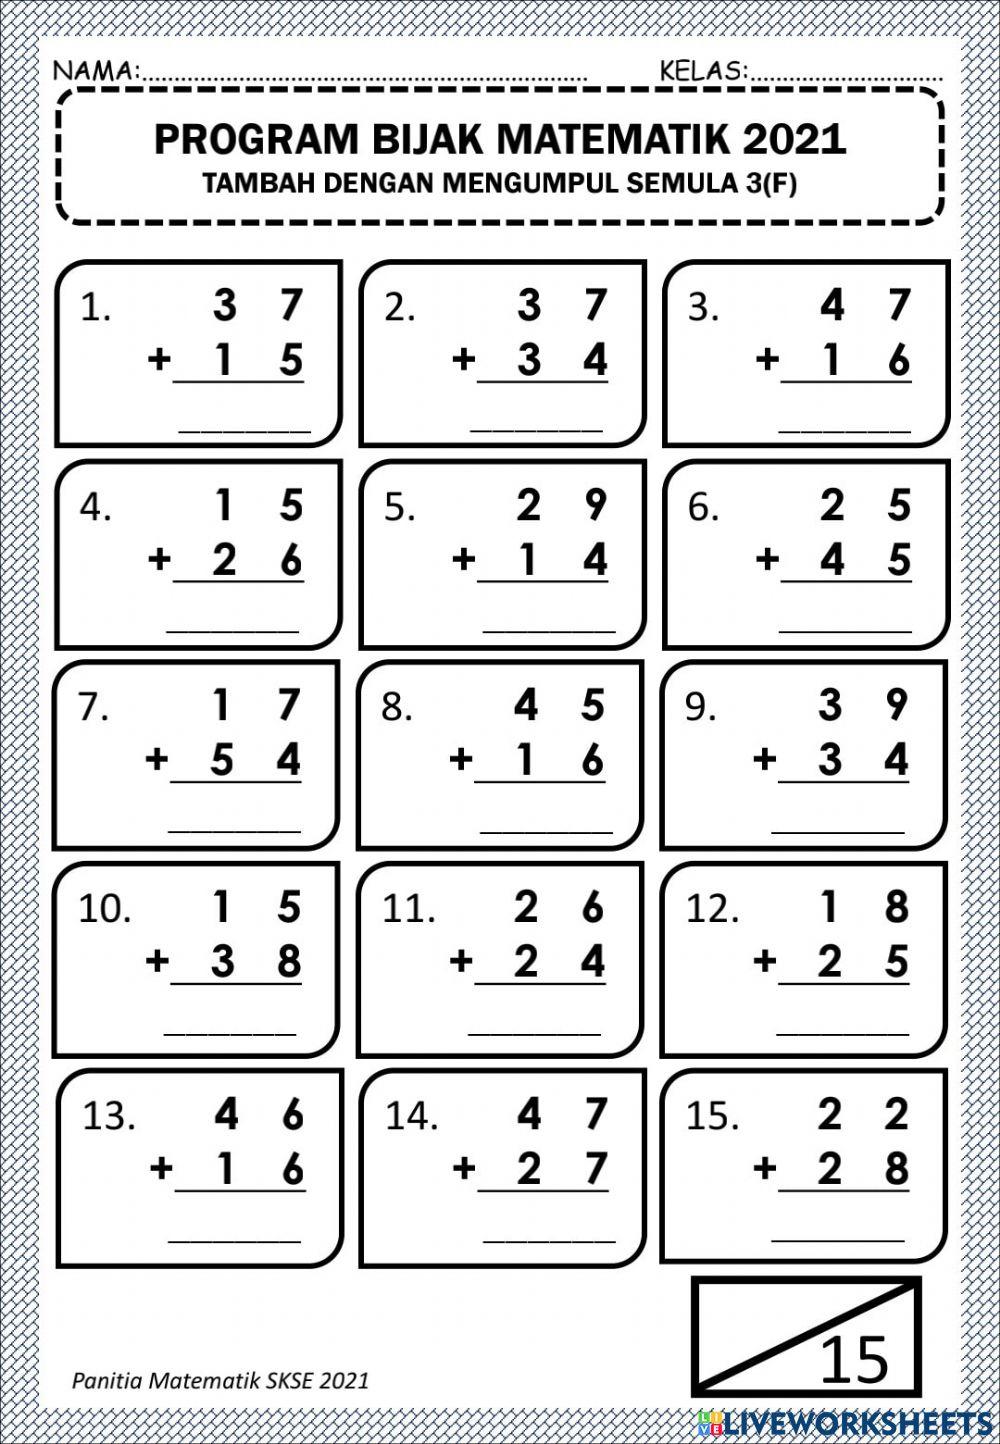 Addition - regrouping 3 digits